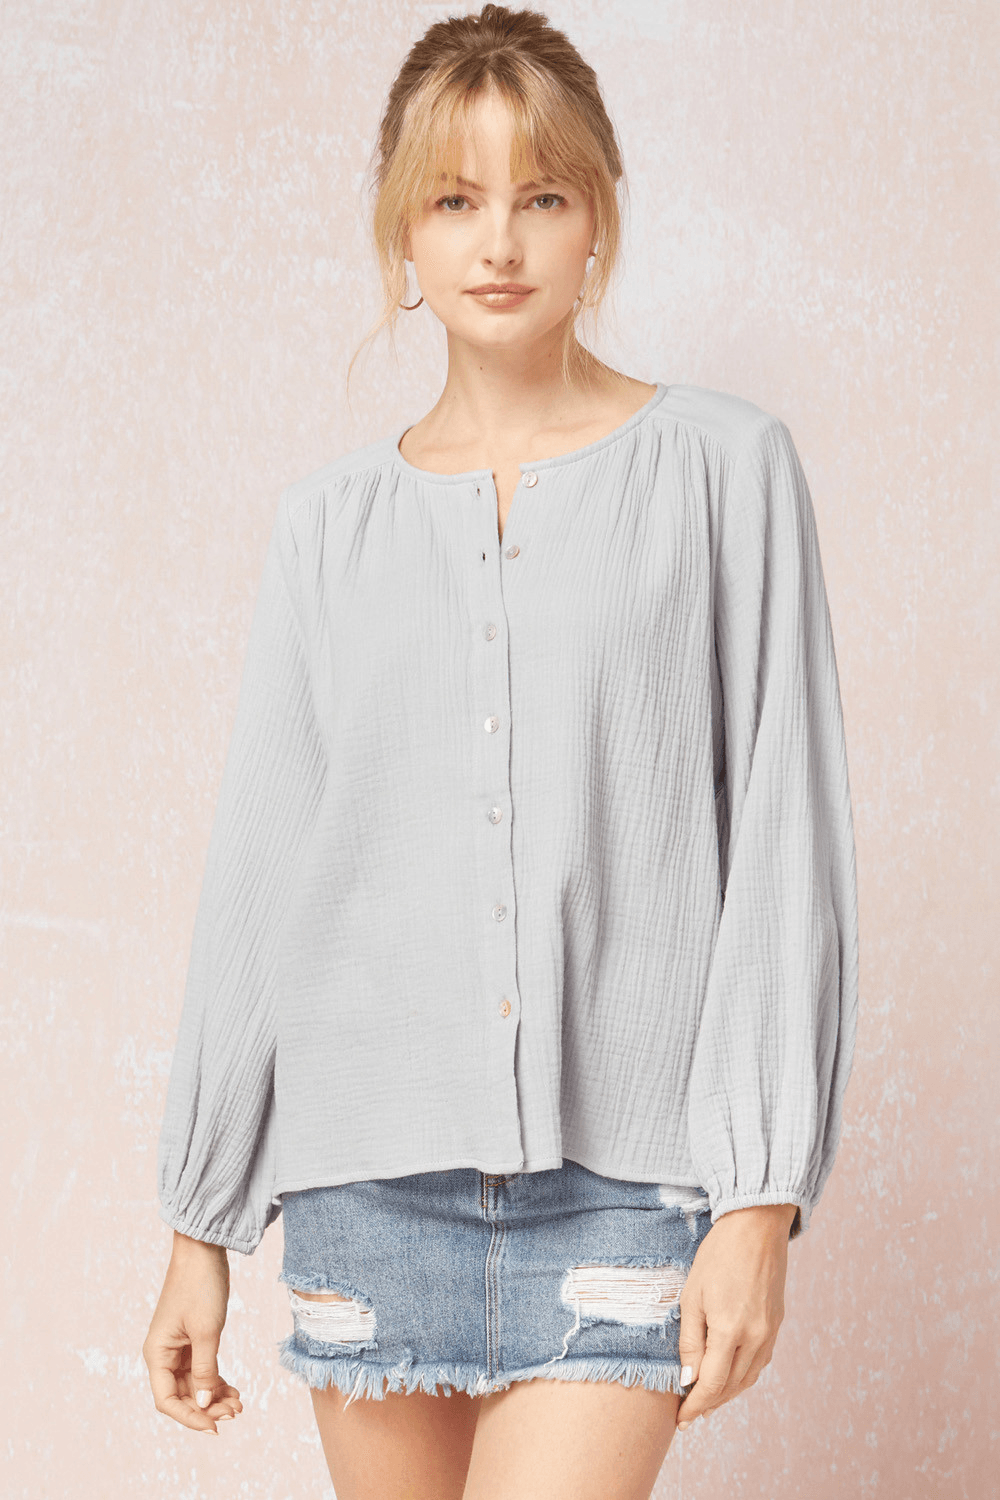 Dusty Blue Baby Top - Lady Dorothy Boutique